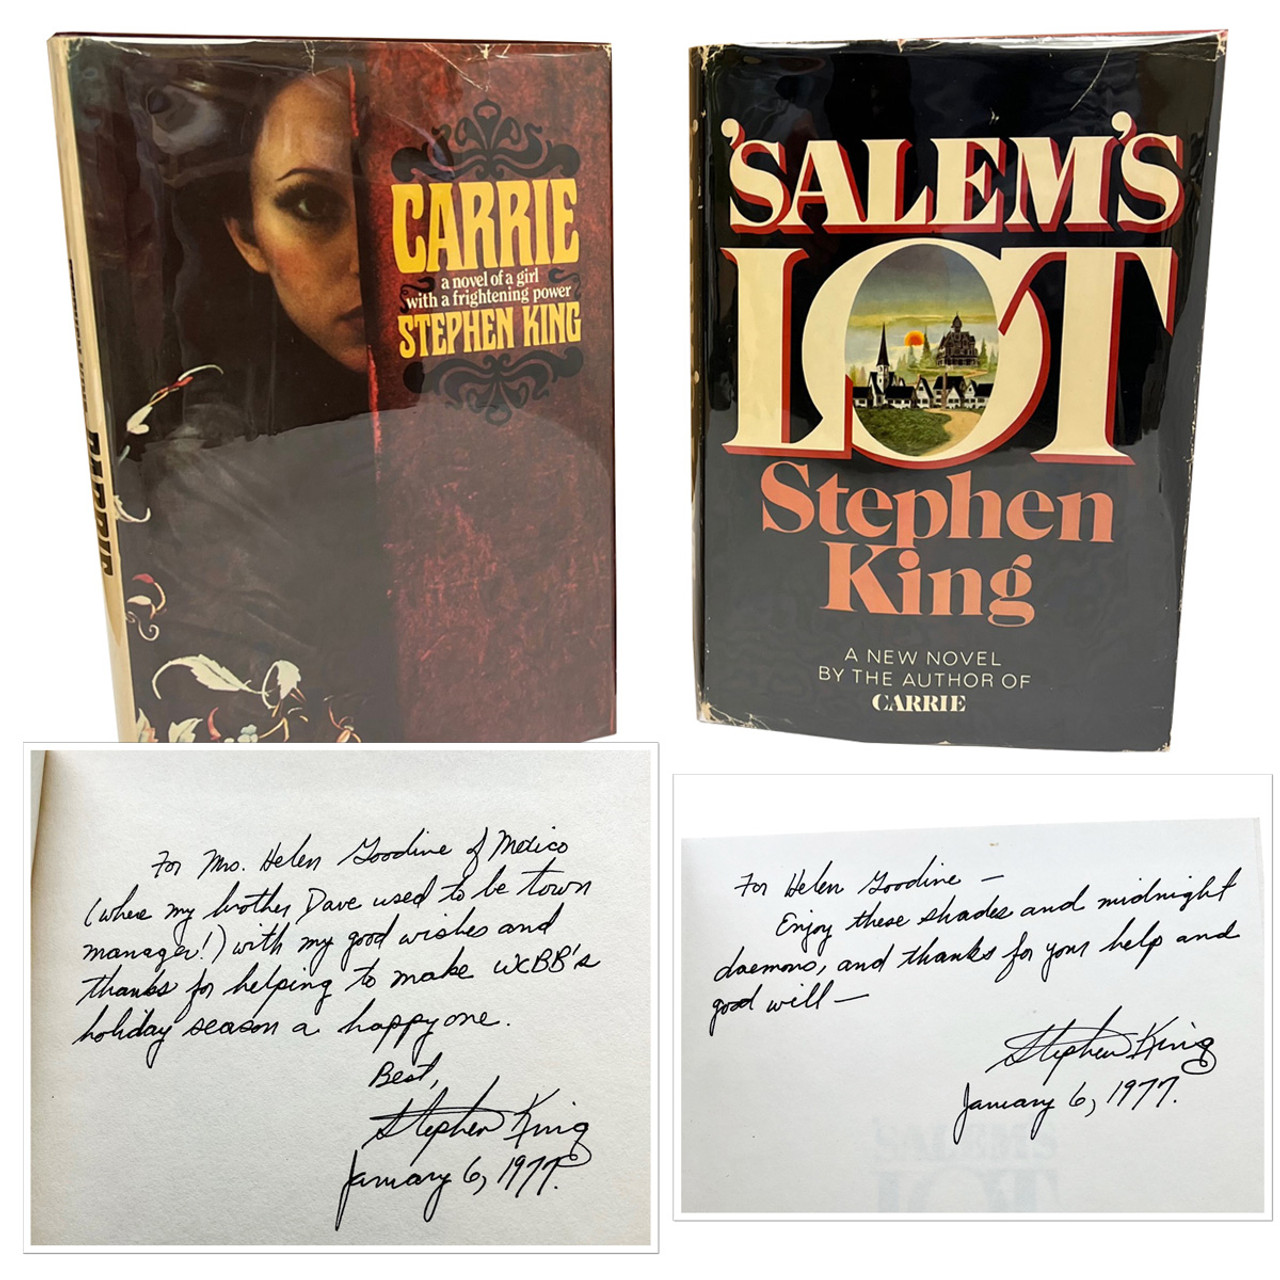 Stephen King "Carrie" (Signed First Edition), "Salem's Lot" (Signed First/Second) Matching Inscribed Association Set w/Provenance [Jan 6, 1977]